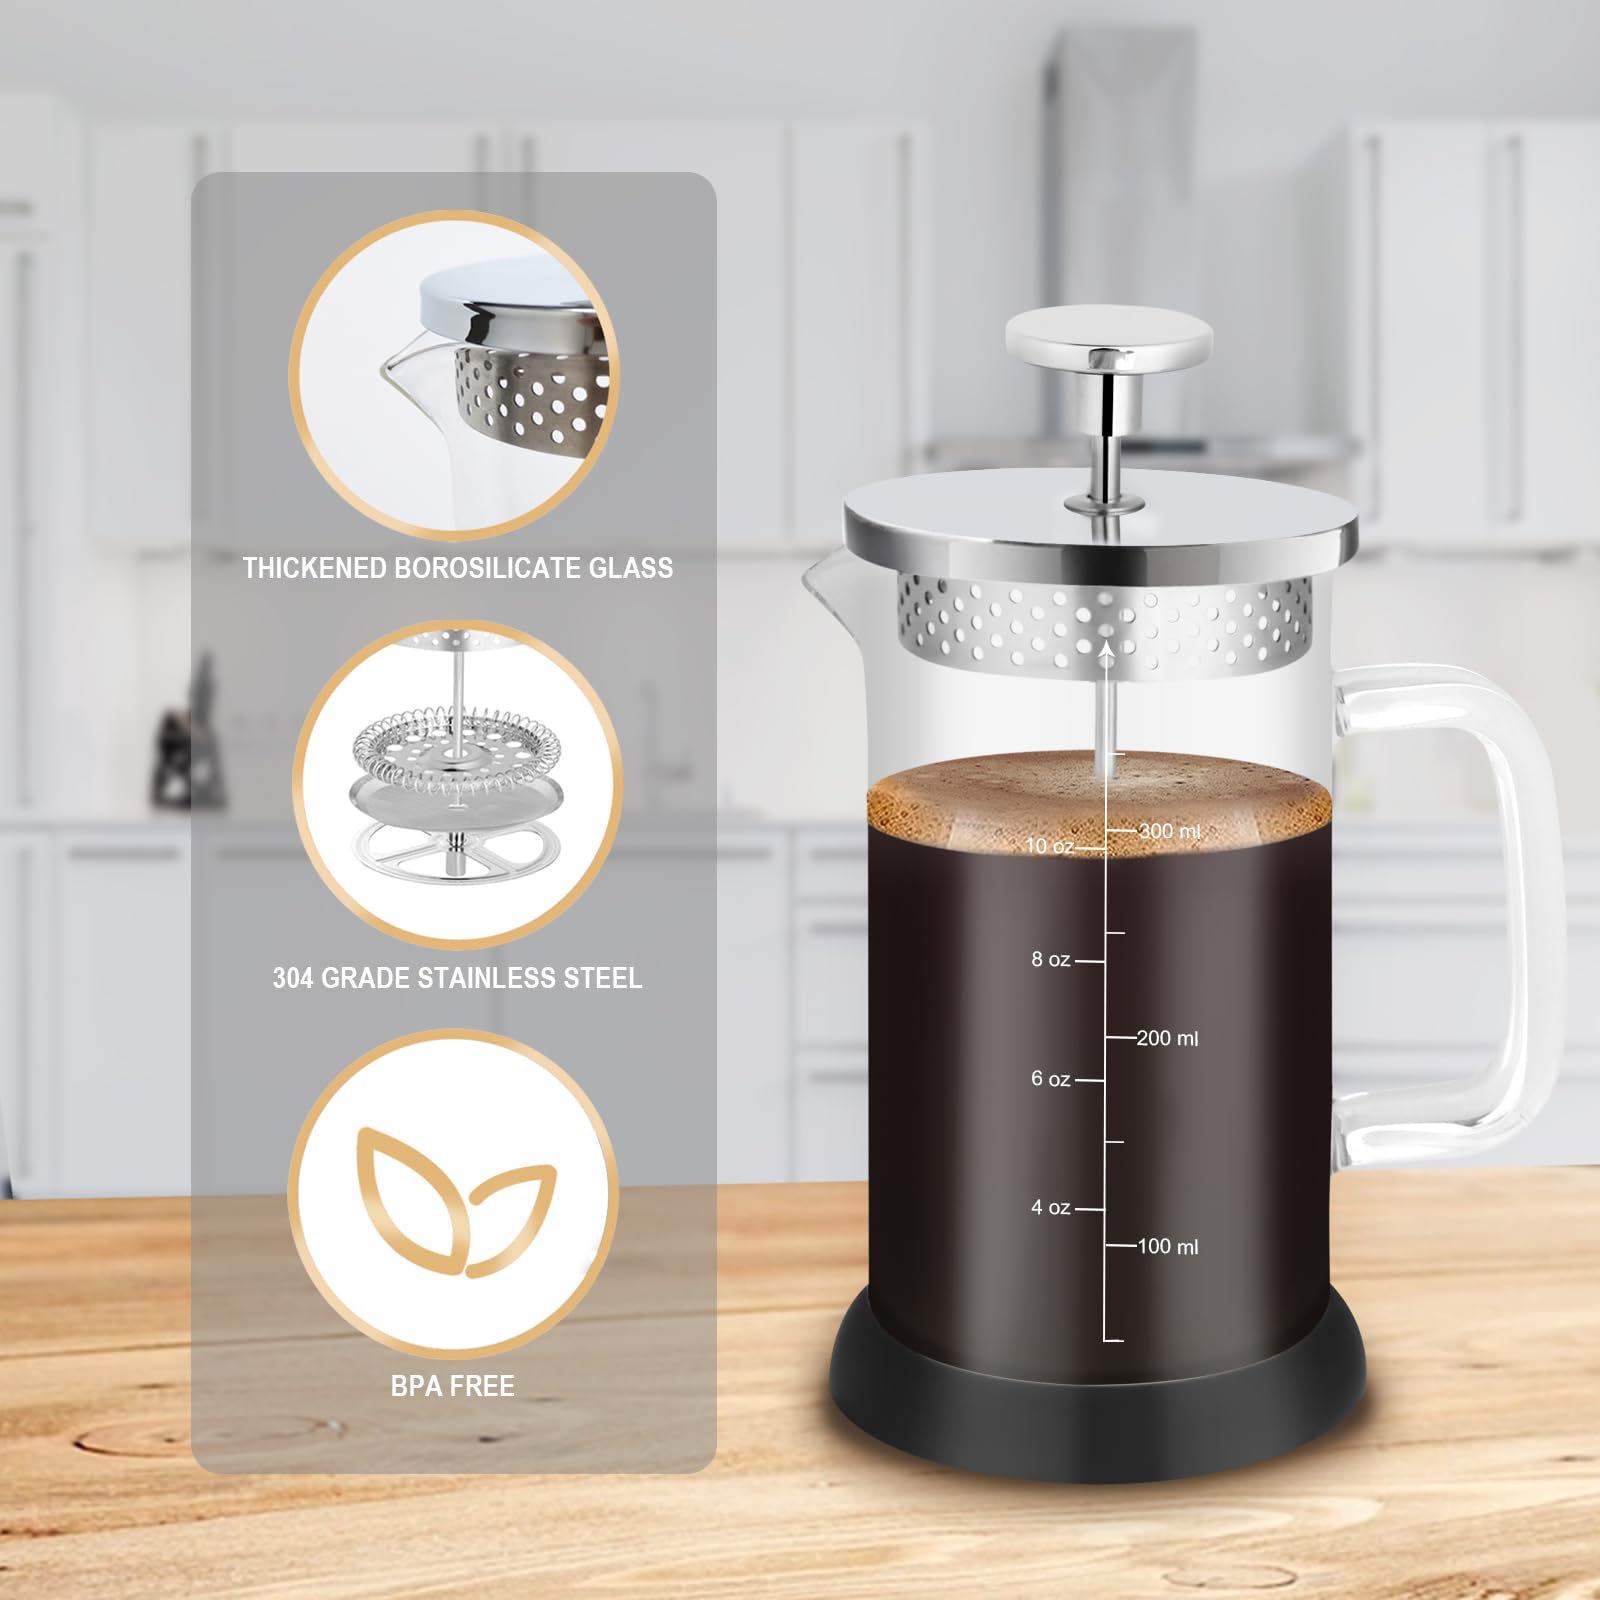 Nukeekee French Press Coffee Maker,304 Stainless Steel Borosilicate Glass Coffee Press,Non-slip Silicone Base,12 oz /350 ml Small French Press,with 2 Extra Screens,Clear and Silver (Concise Style).